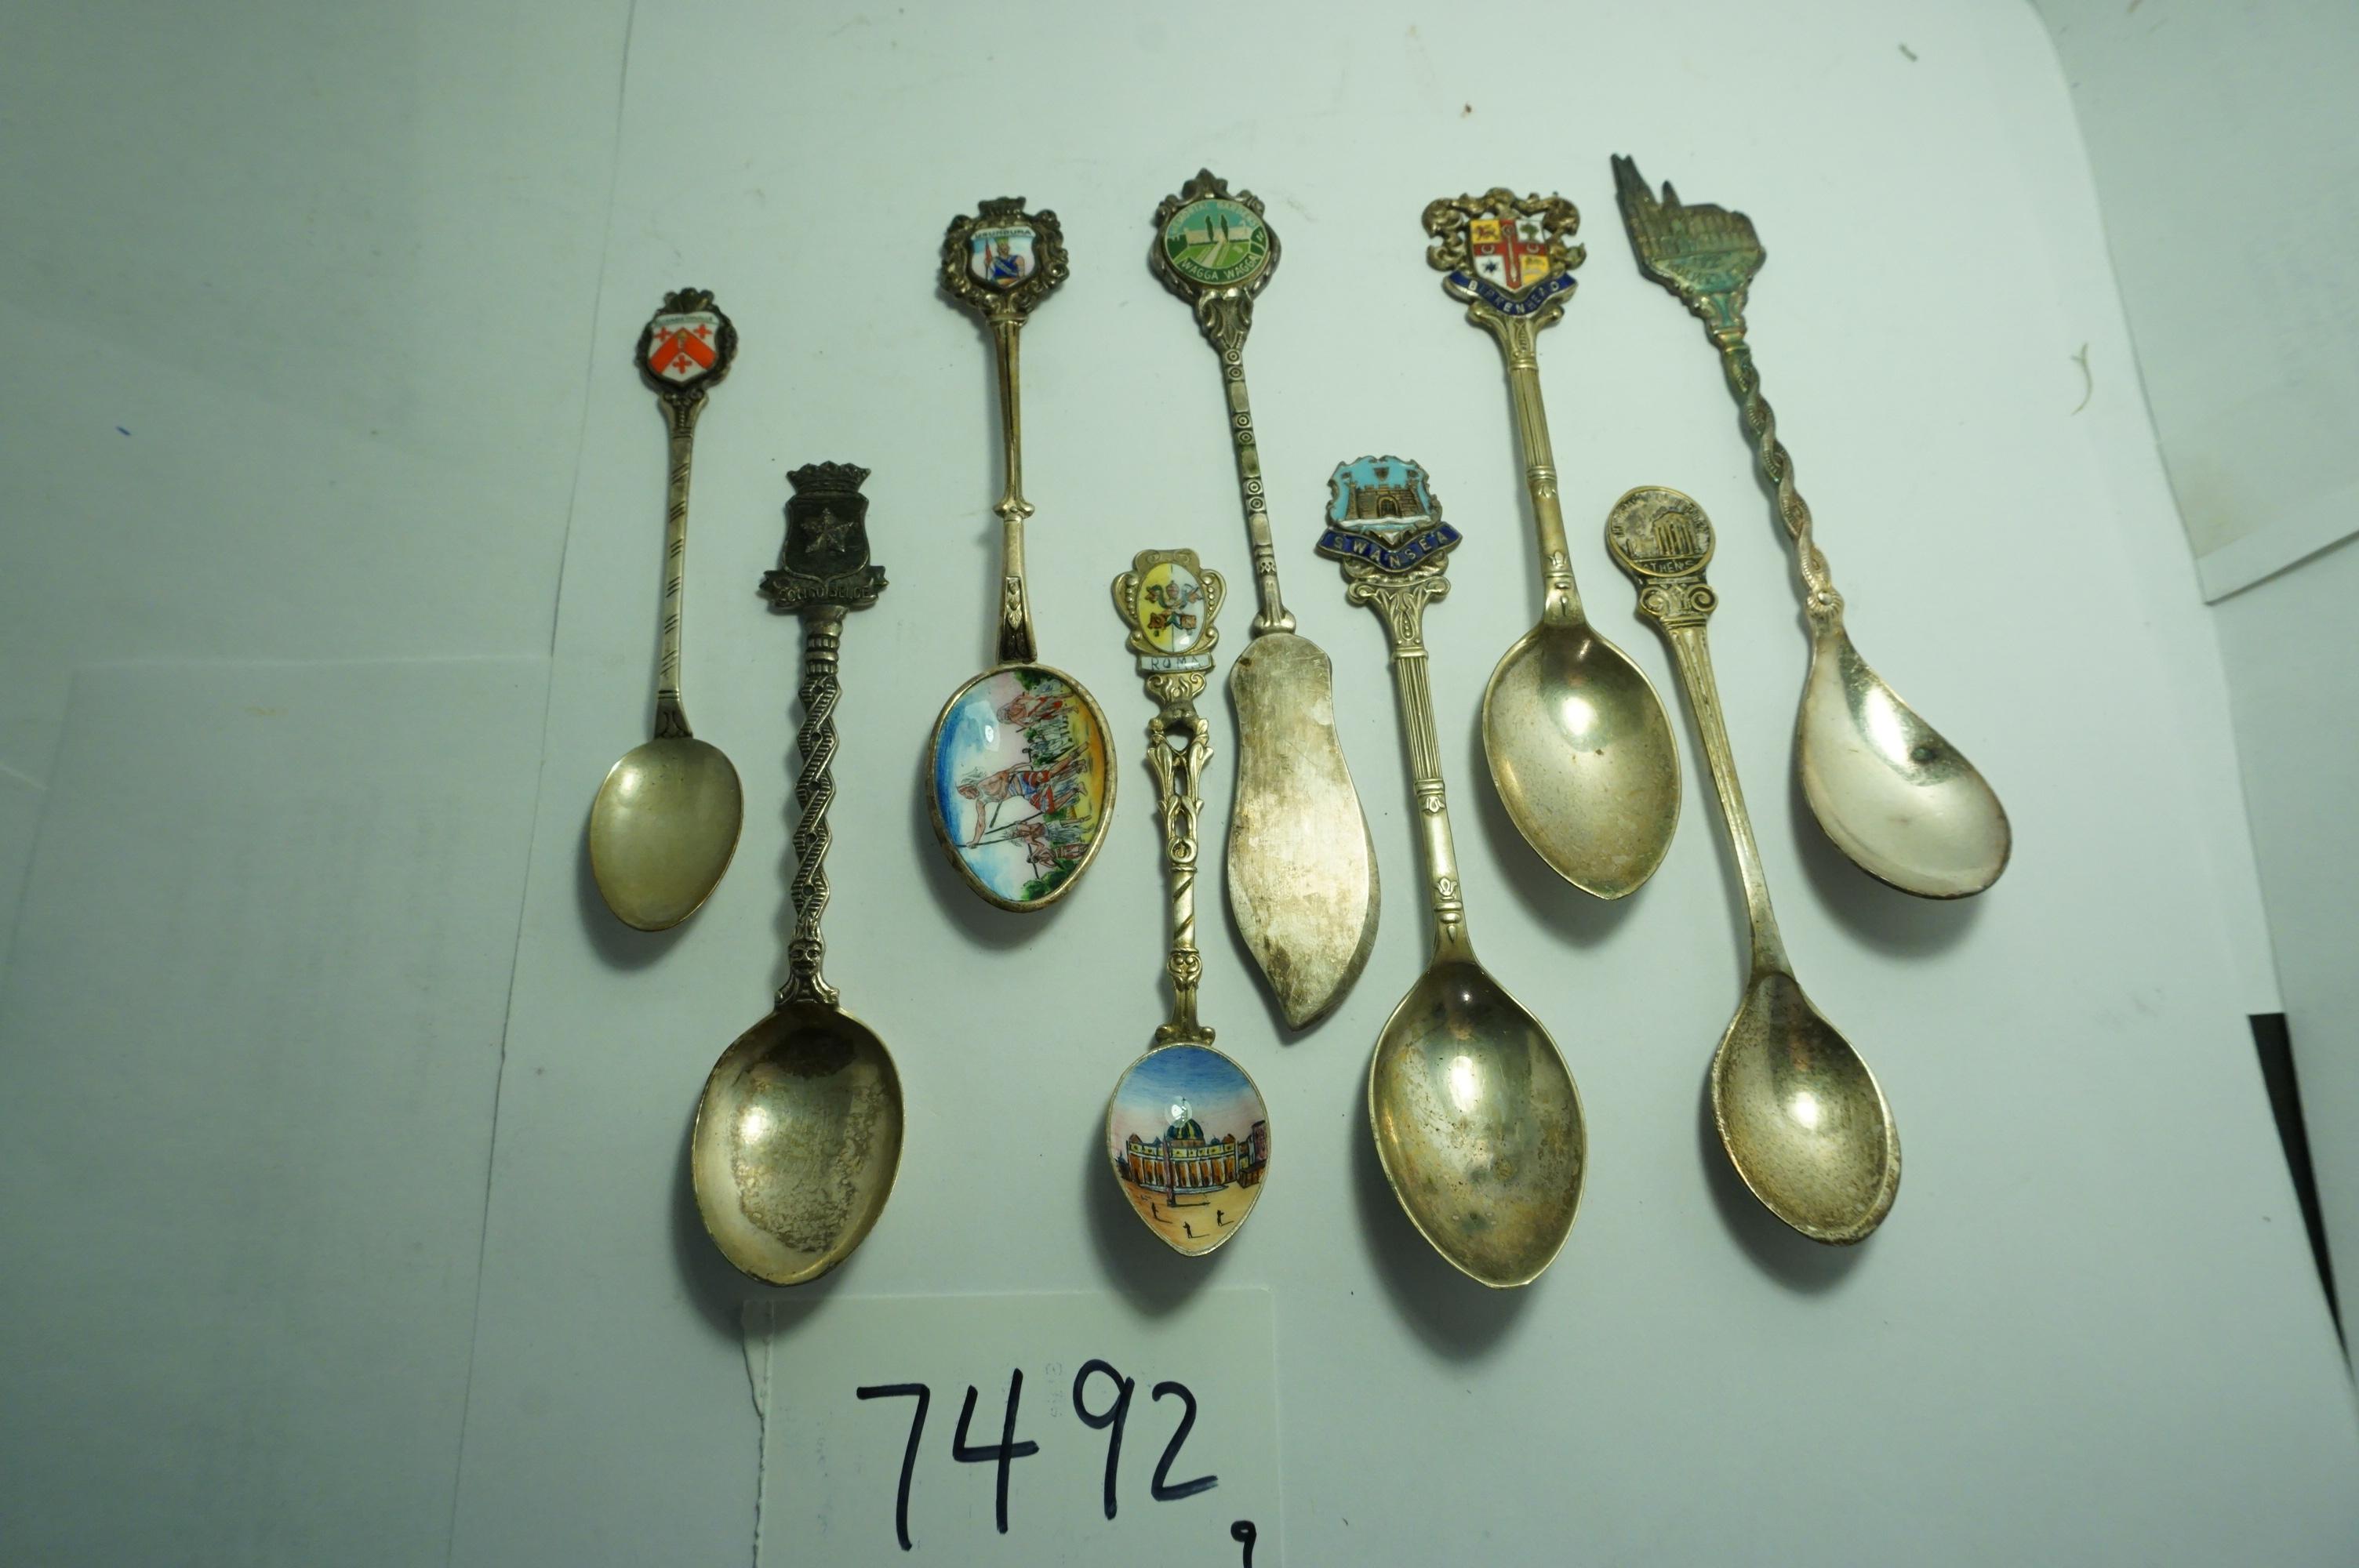 Nine (9) X The Money: Collector Spoons, Estate Find, Metal Content Unknown, one is a butter knife.